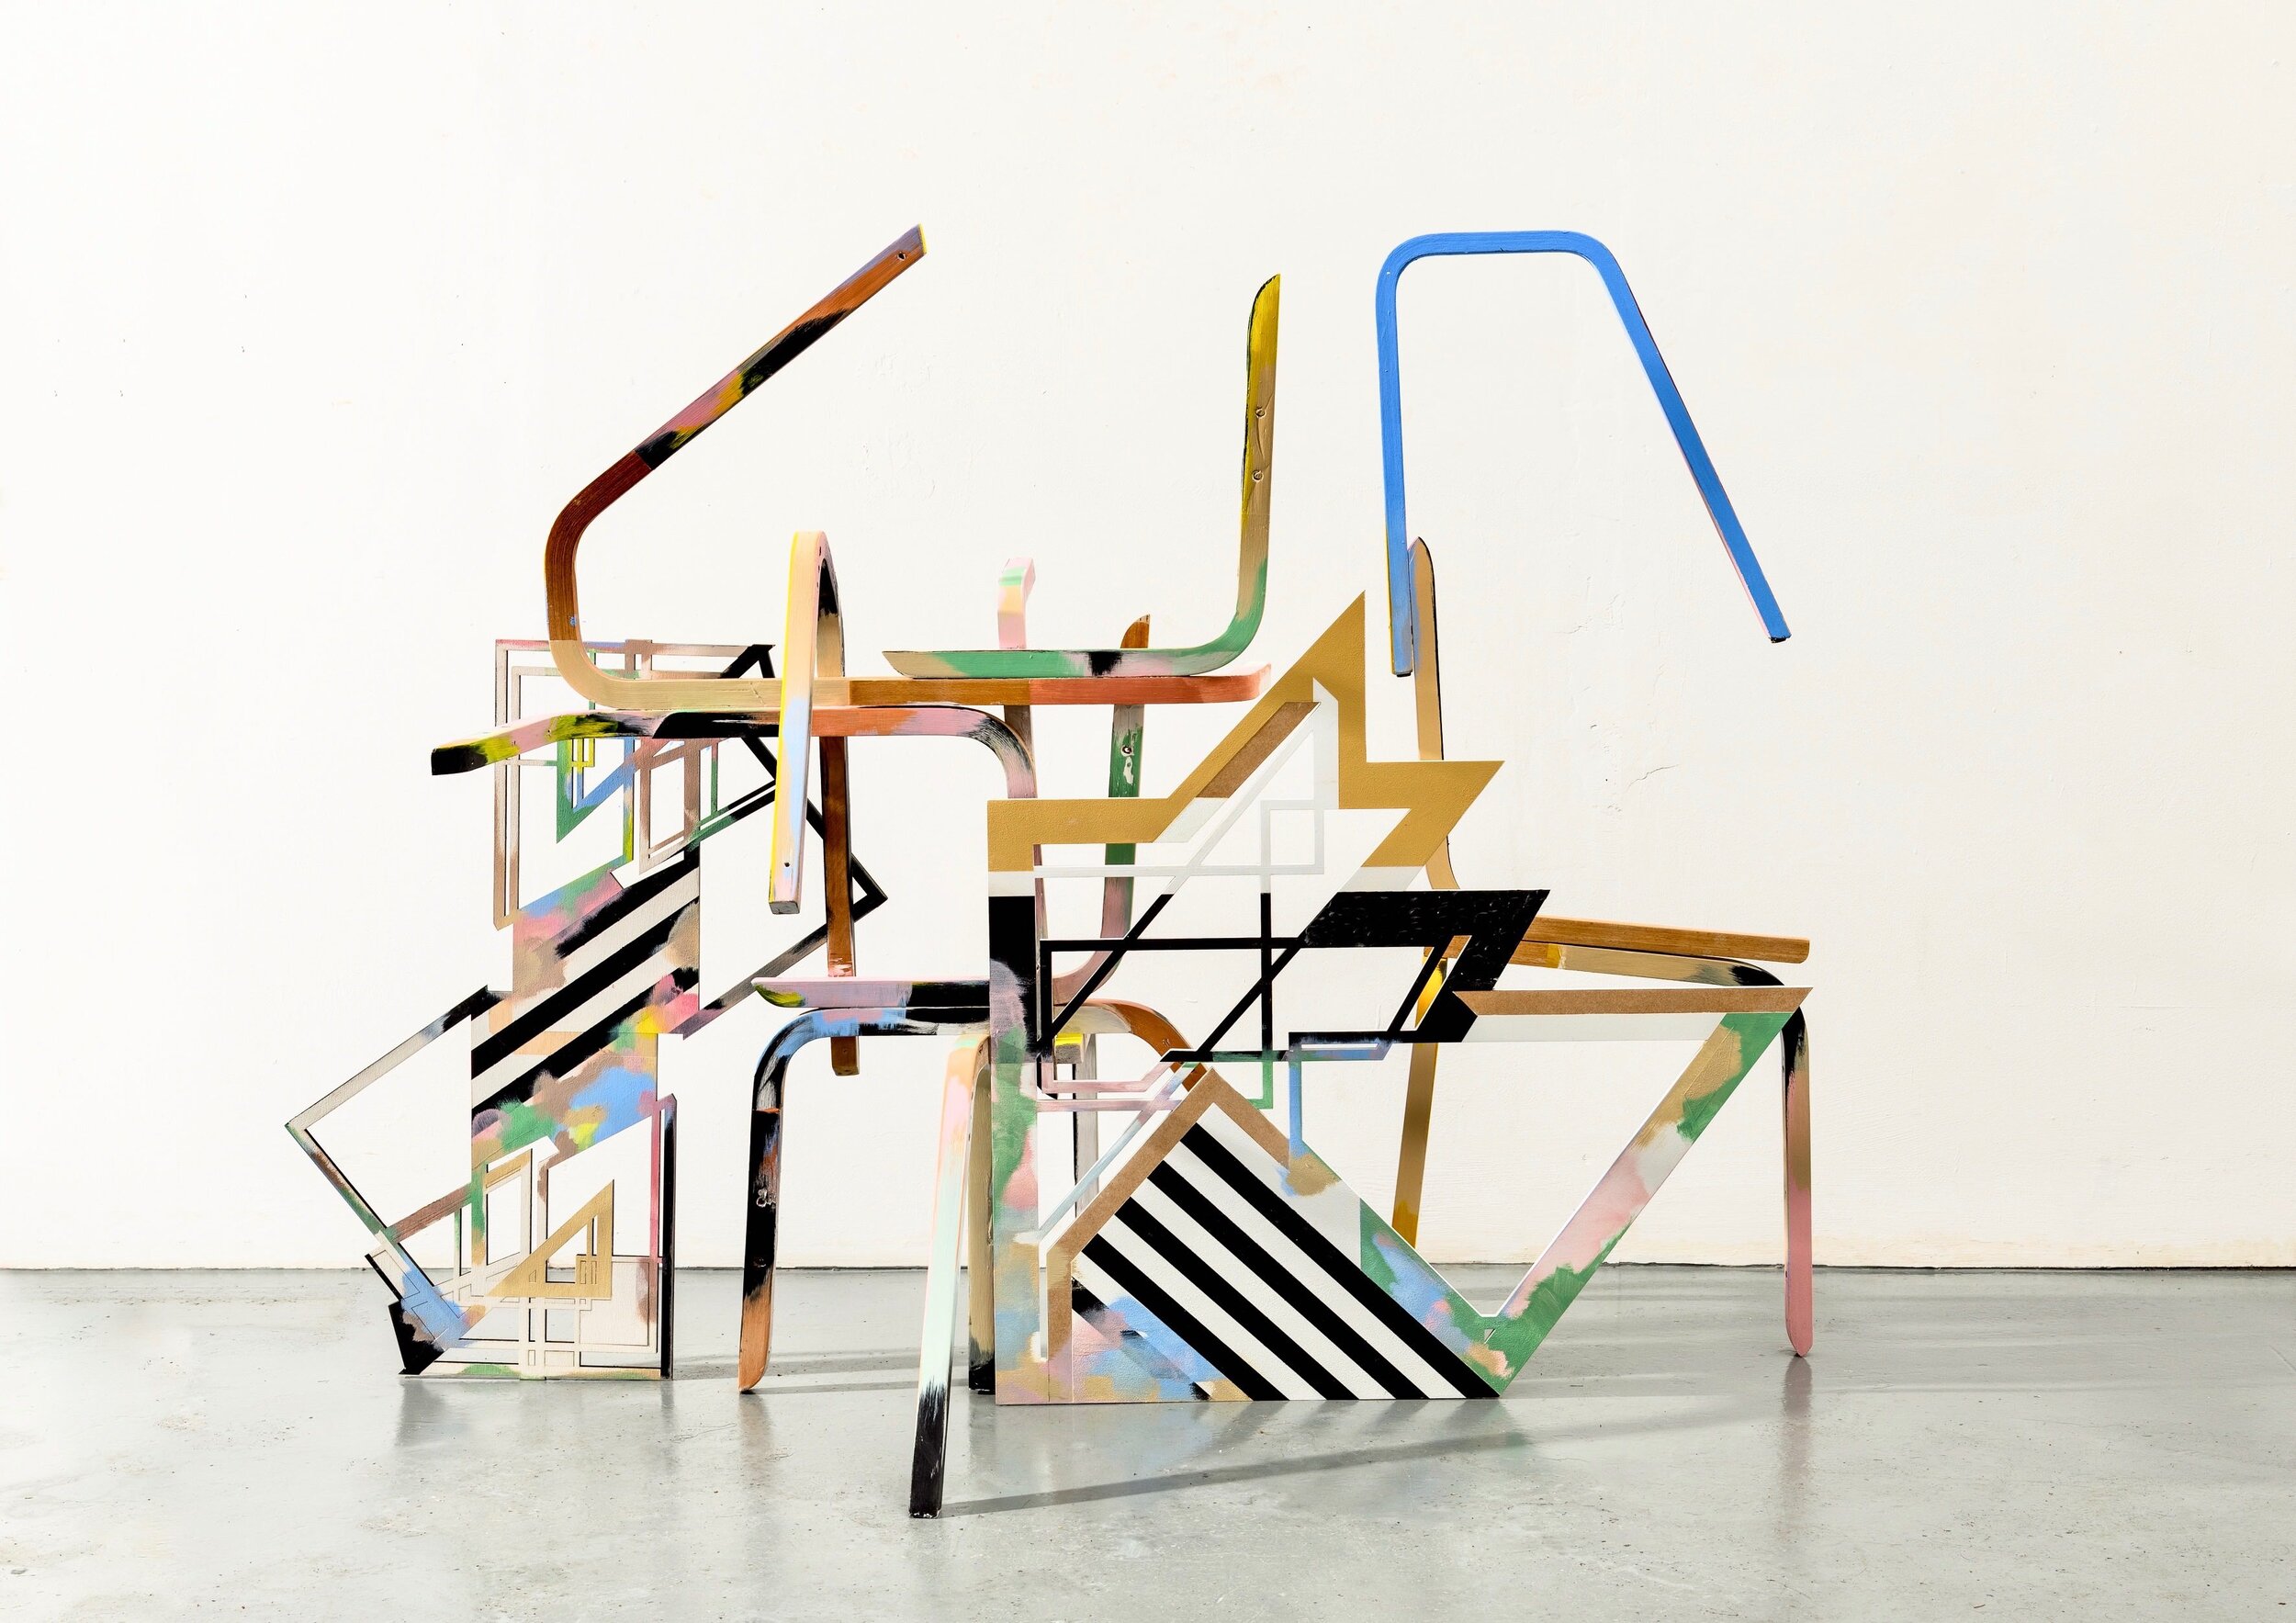 Andrea V Wright, Defence in Depth, Deconstructed Chairs, Engineered Plywood, Paint.2021.jpg